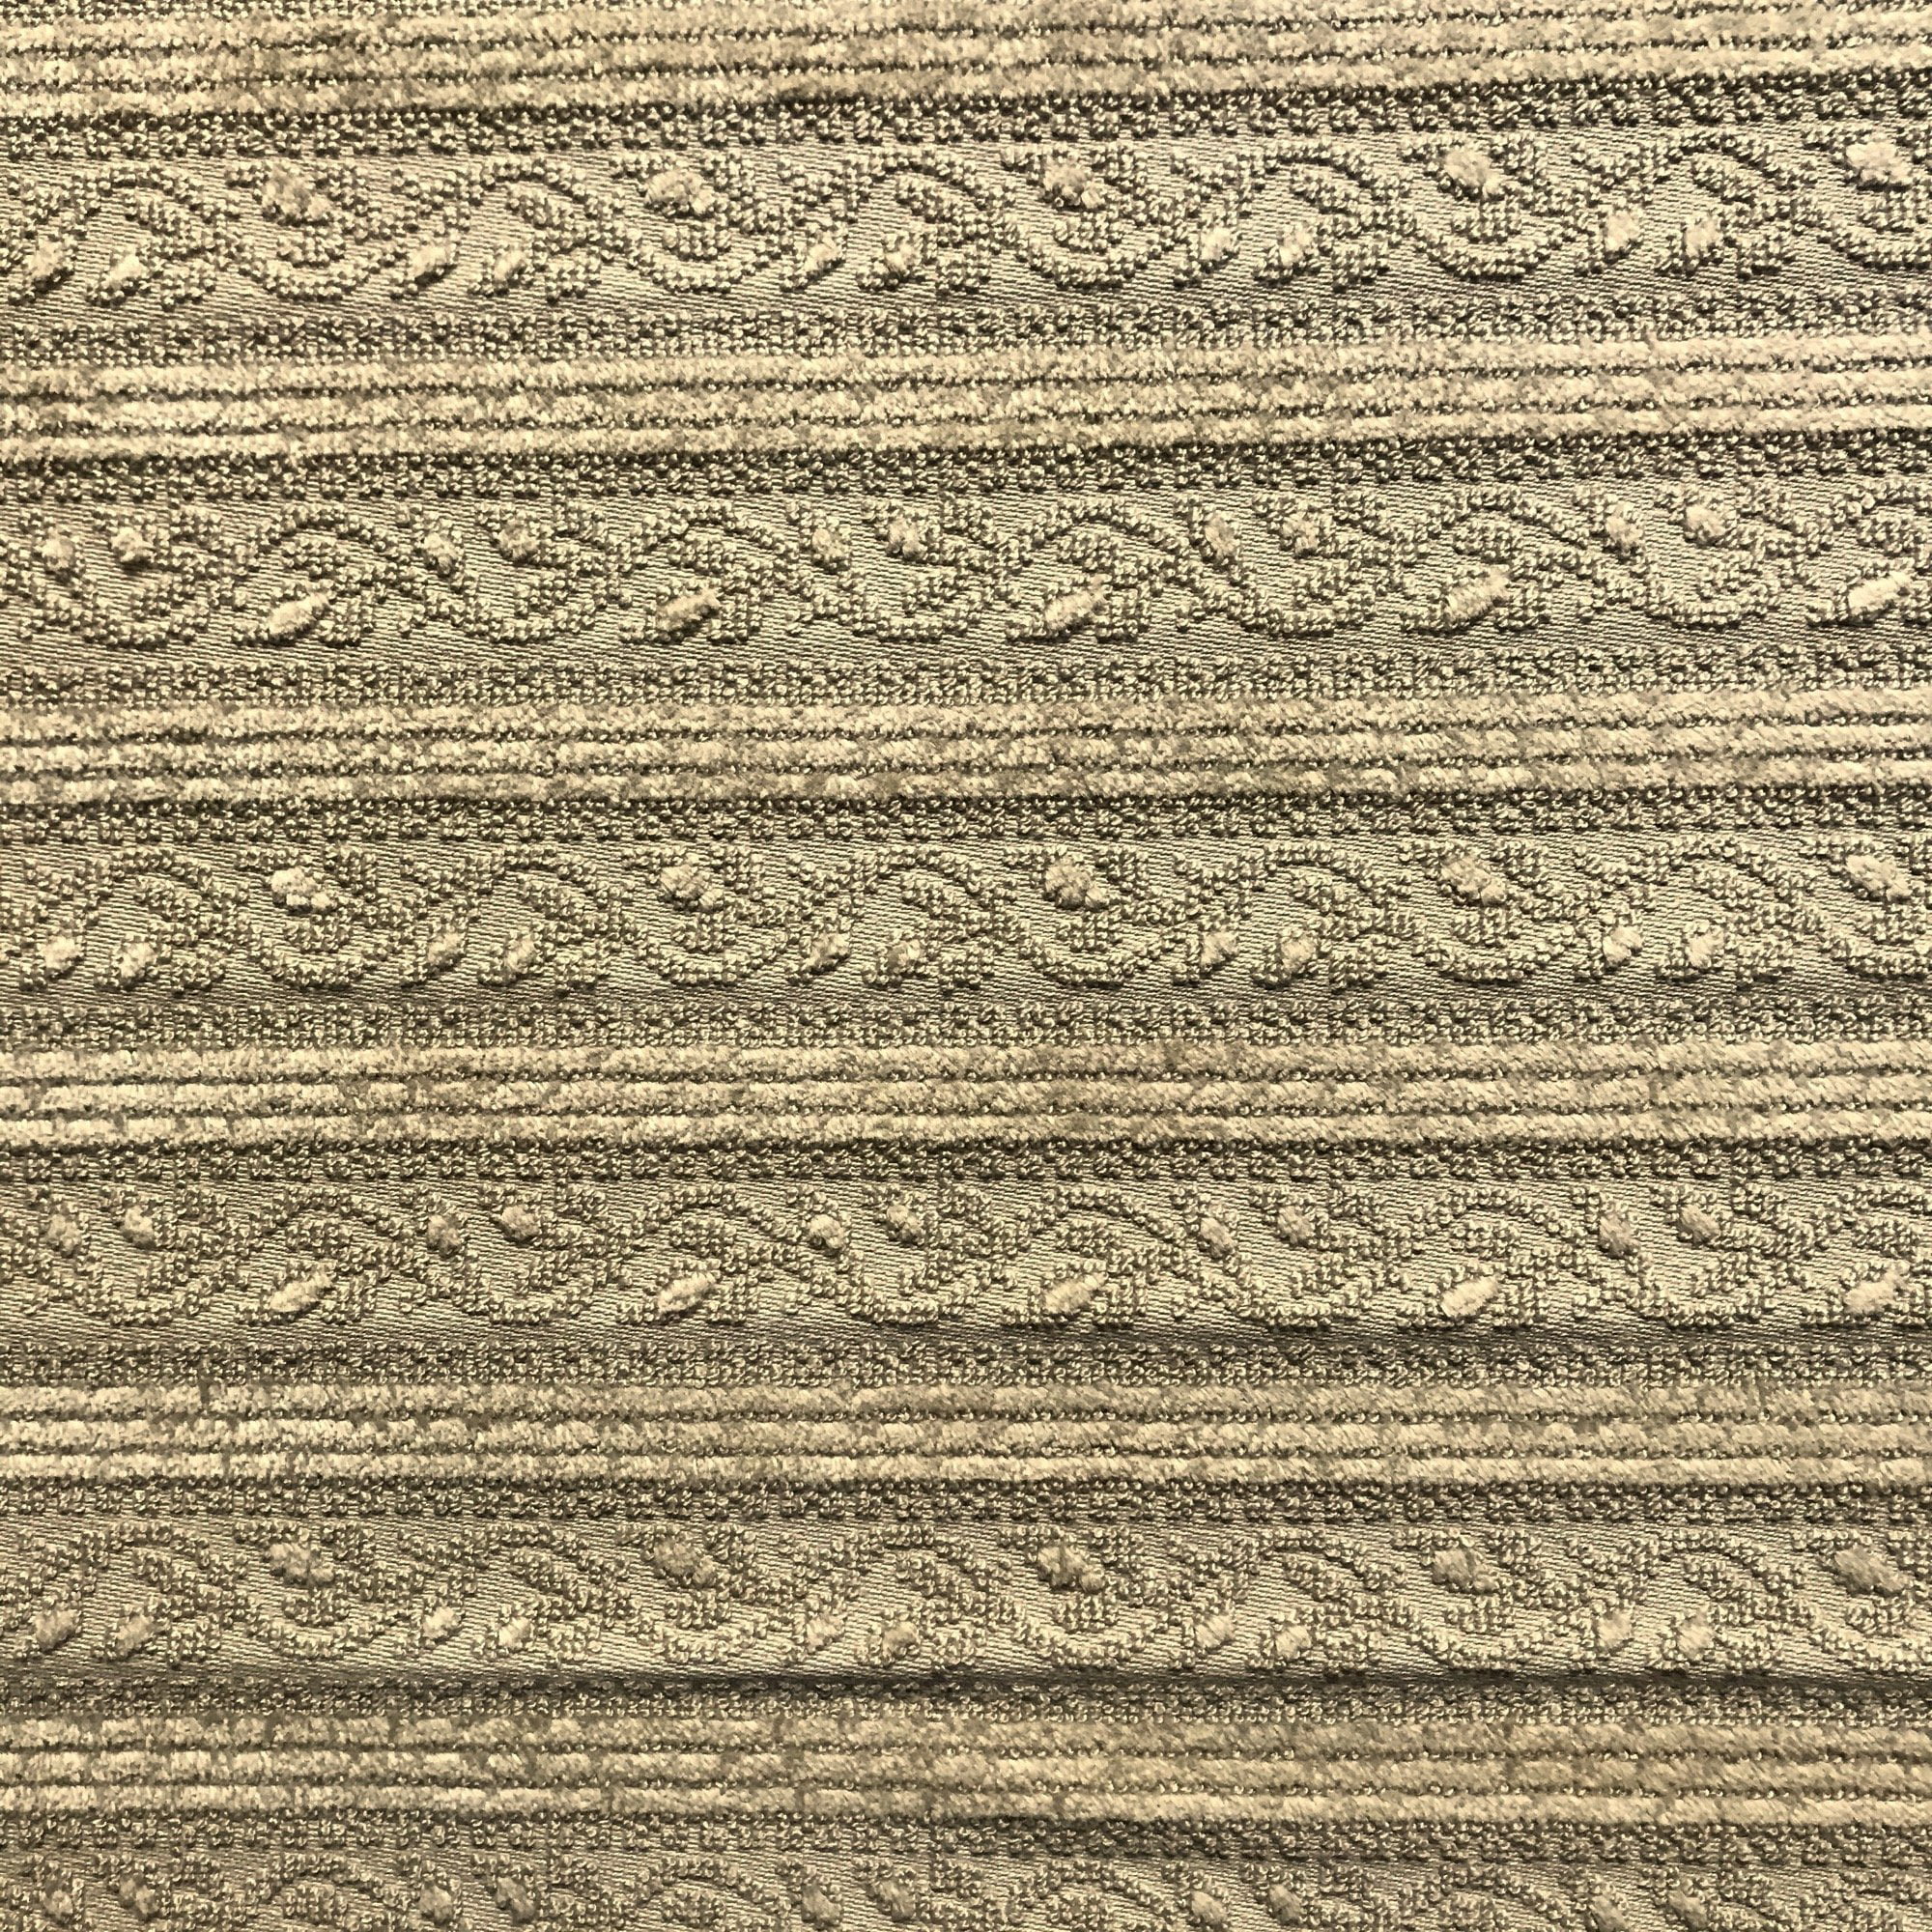 F8 Tan Floral Upholstery Fabric - yard —